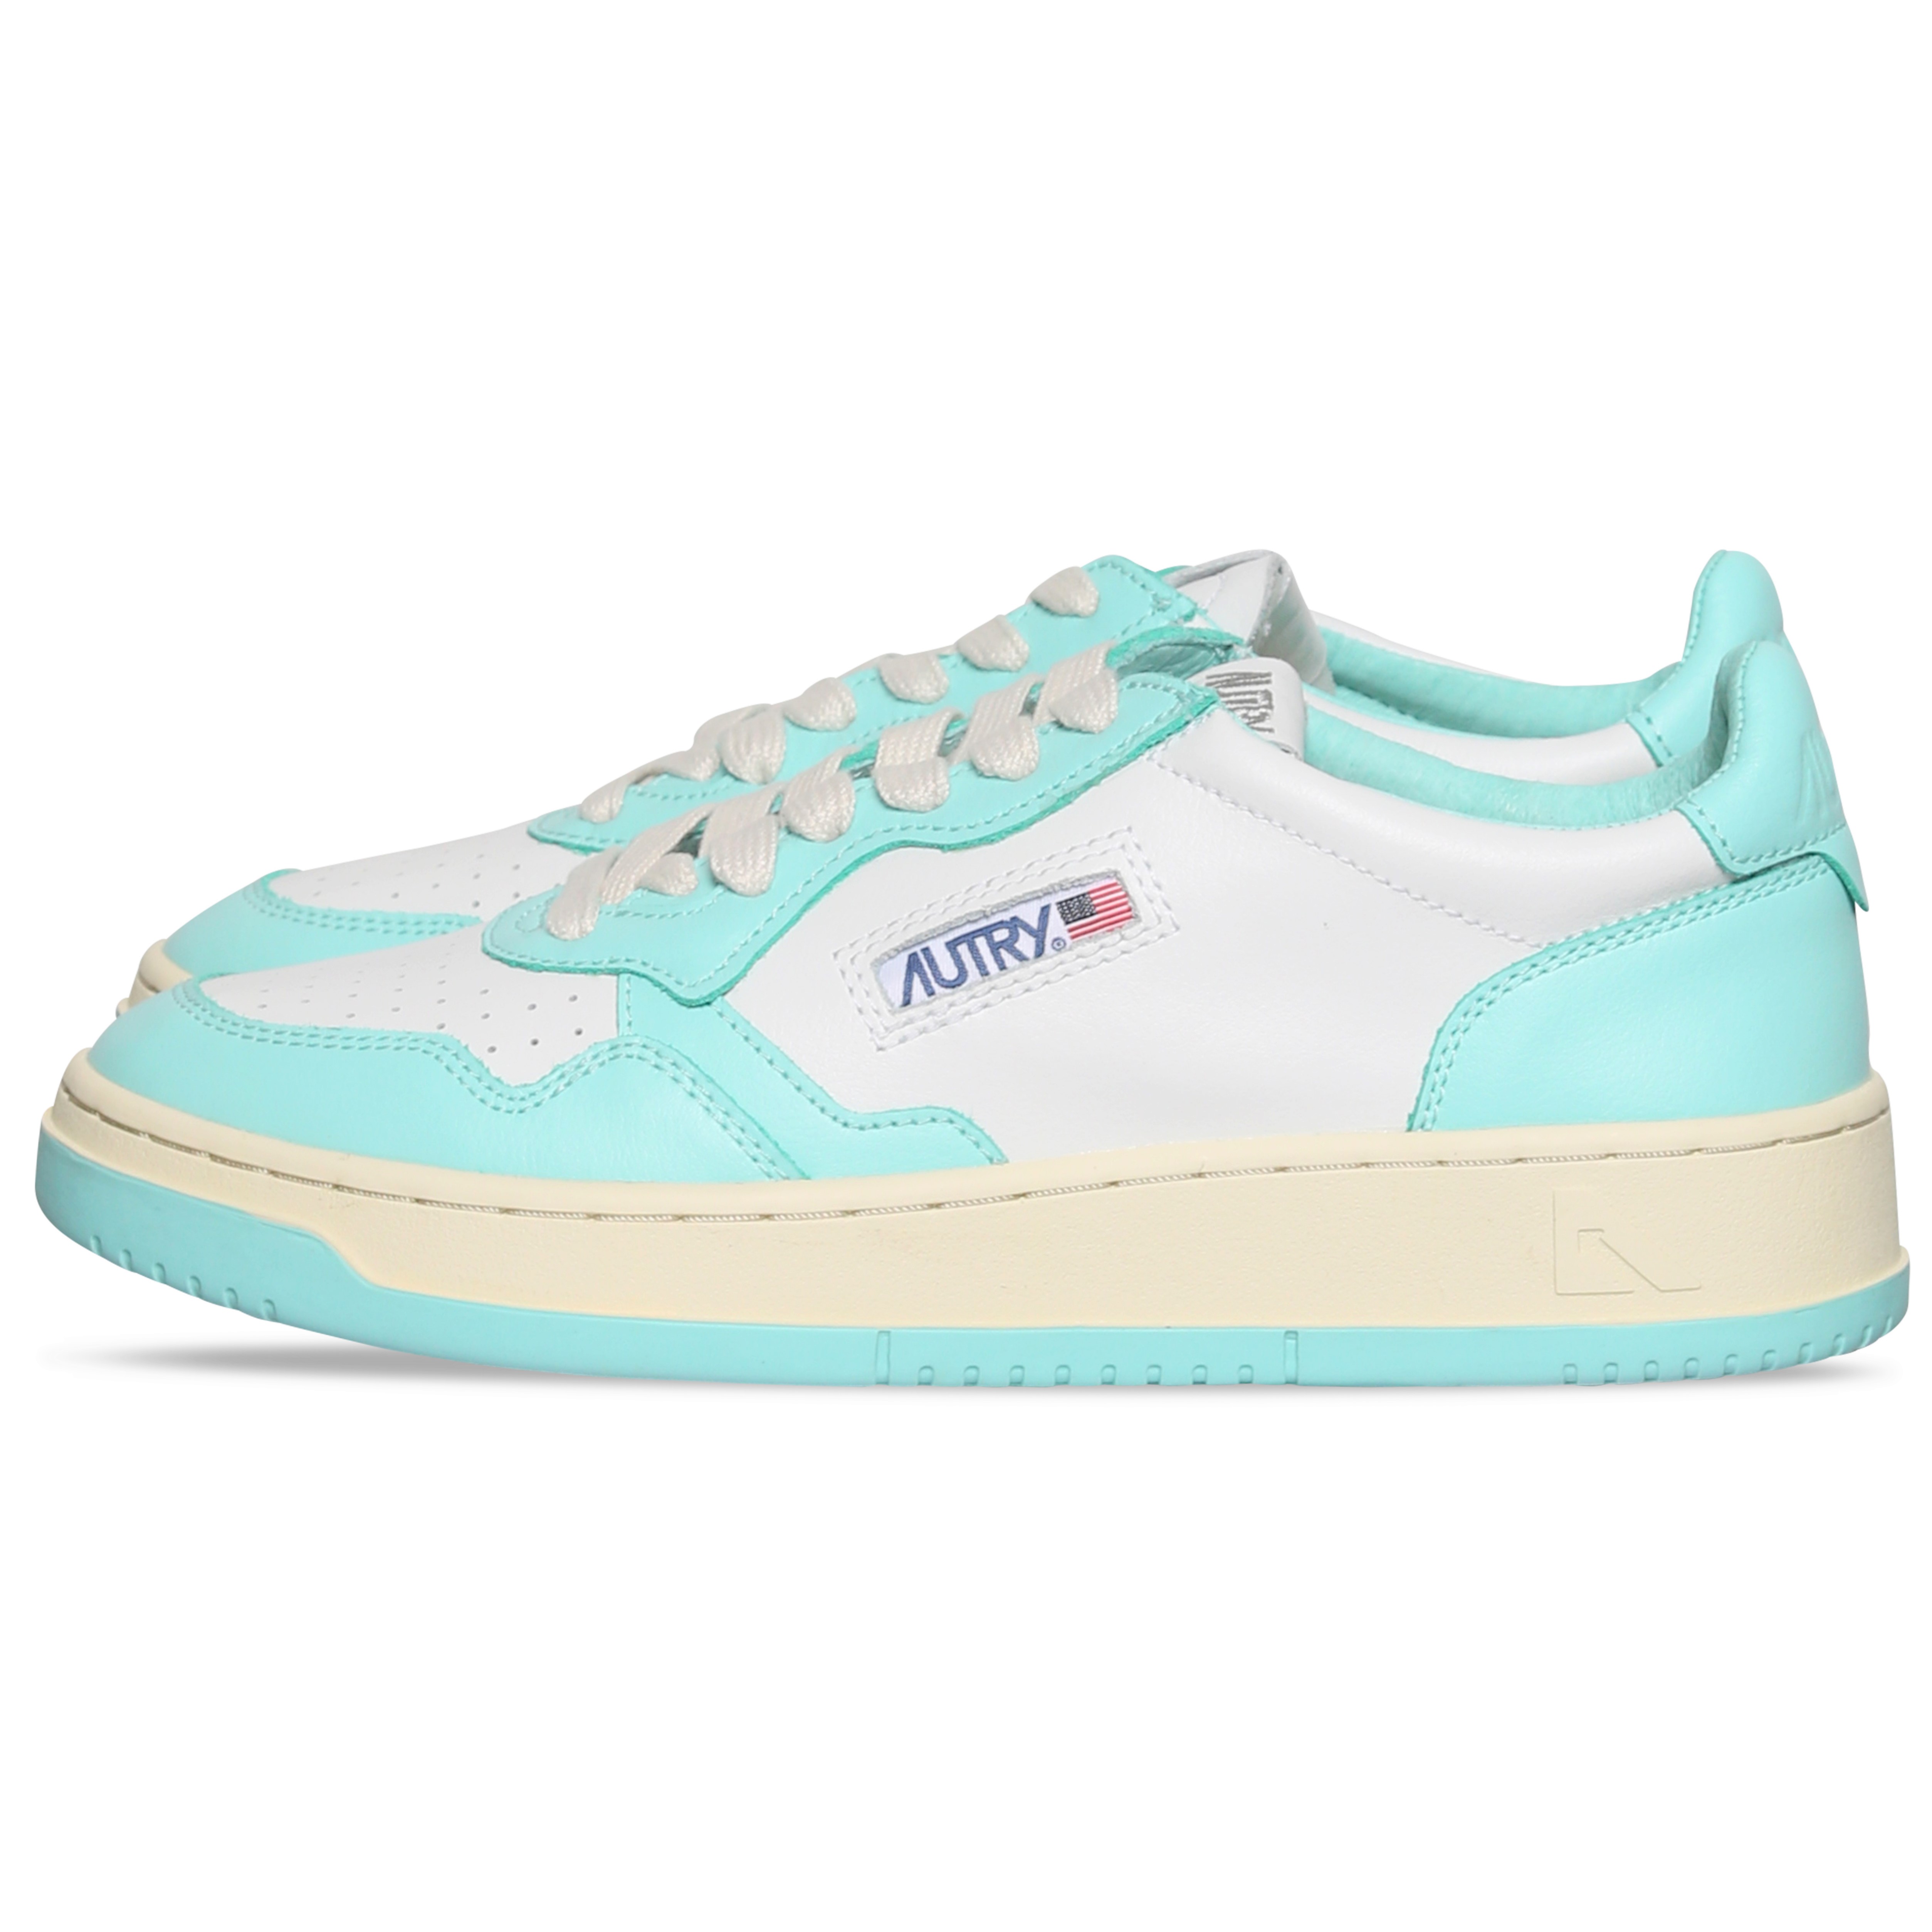 Autry Action Shoes Low Sneaker White/Turquoise